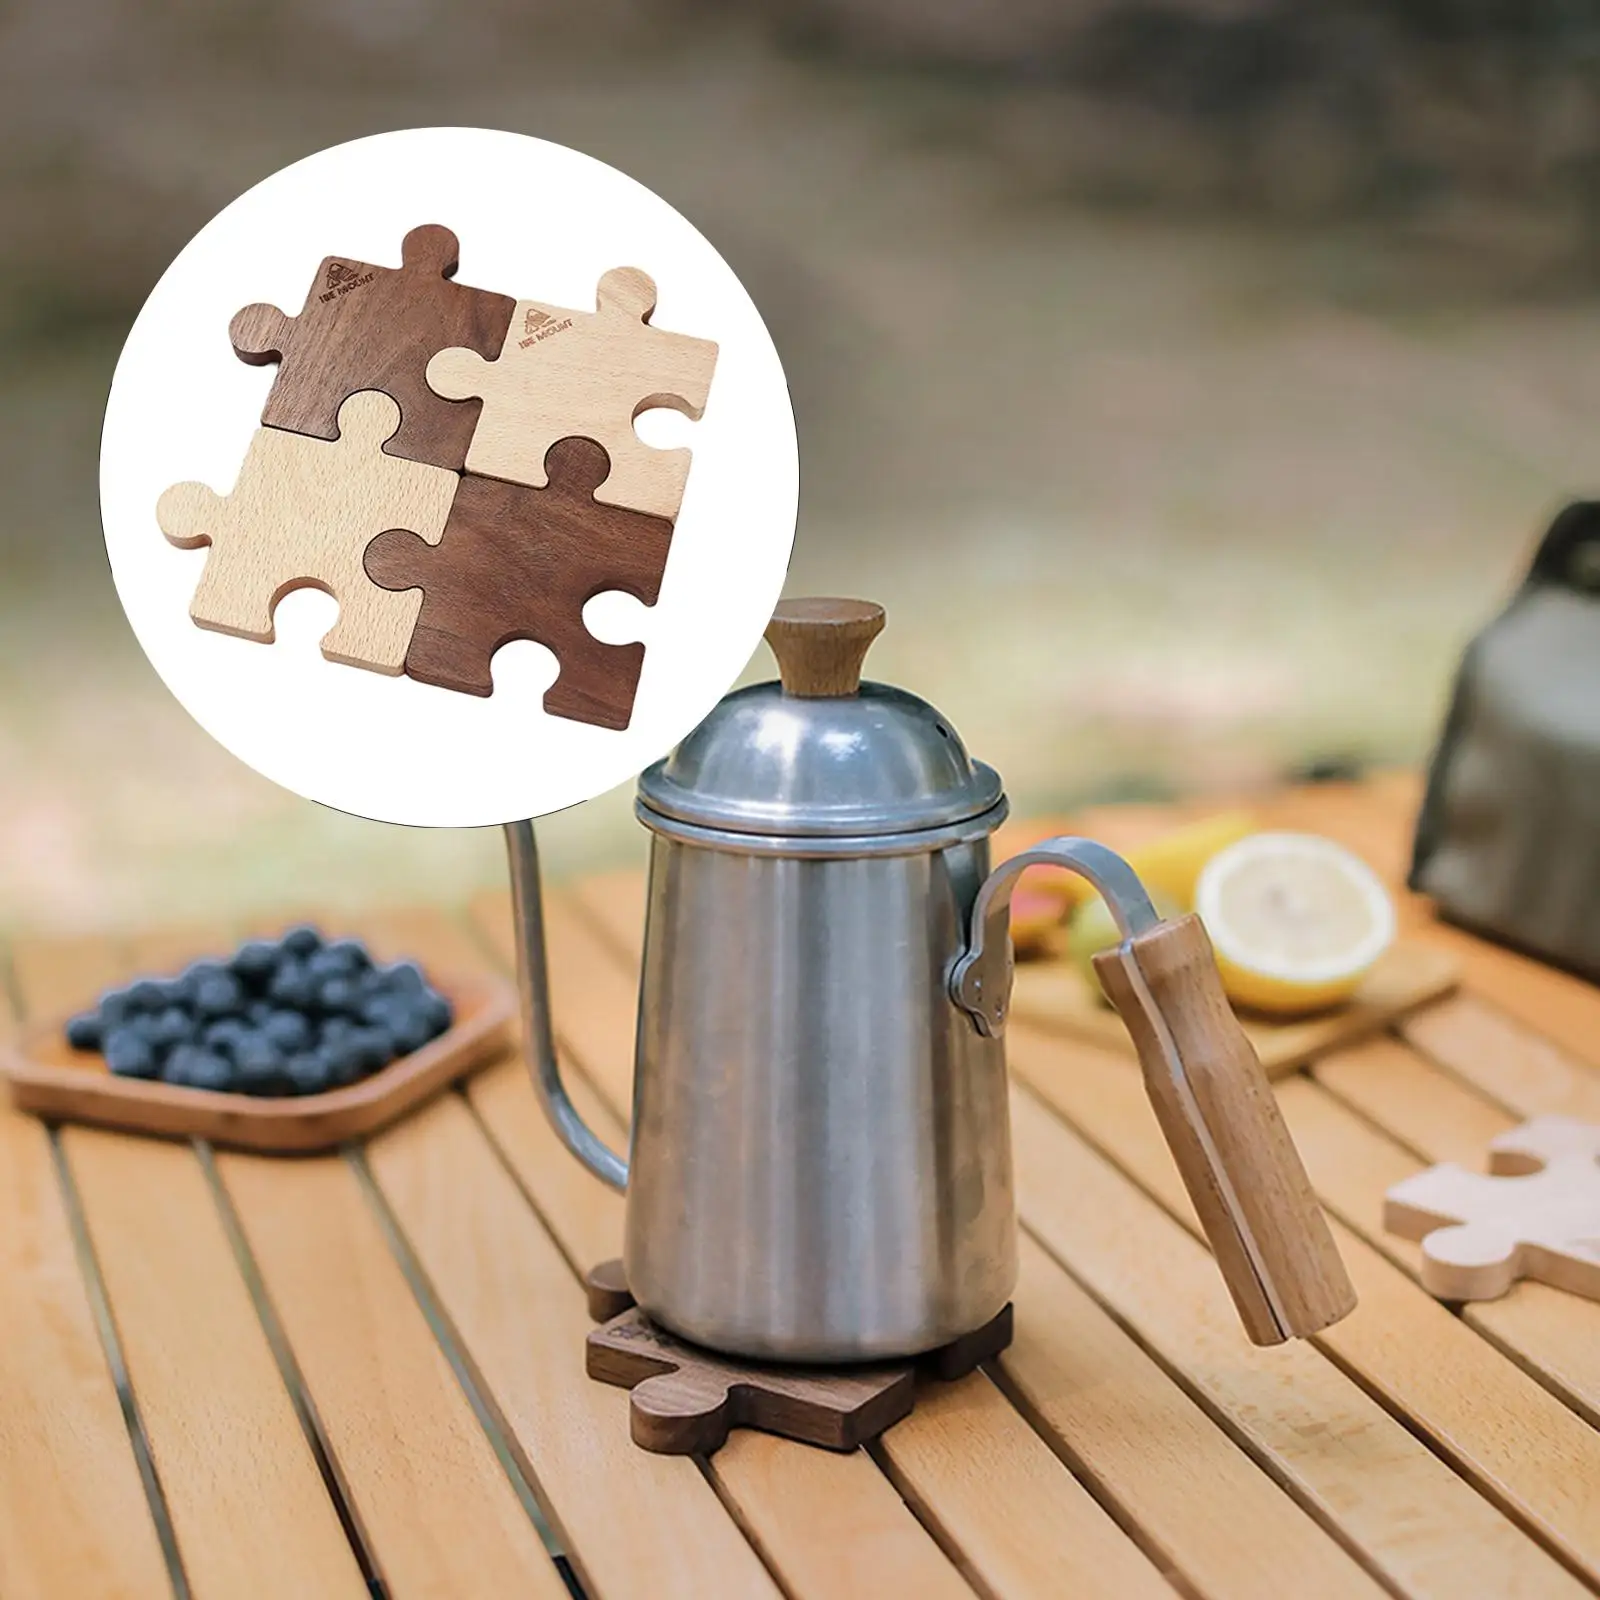 Set of 4 Wooden Coasters Jigsaw Puzzle Design Heat Resistant Durable Housewarming Gifts Tea Cup Pad for Any Kind of Cup Tabletop